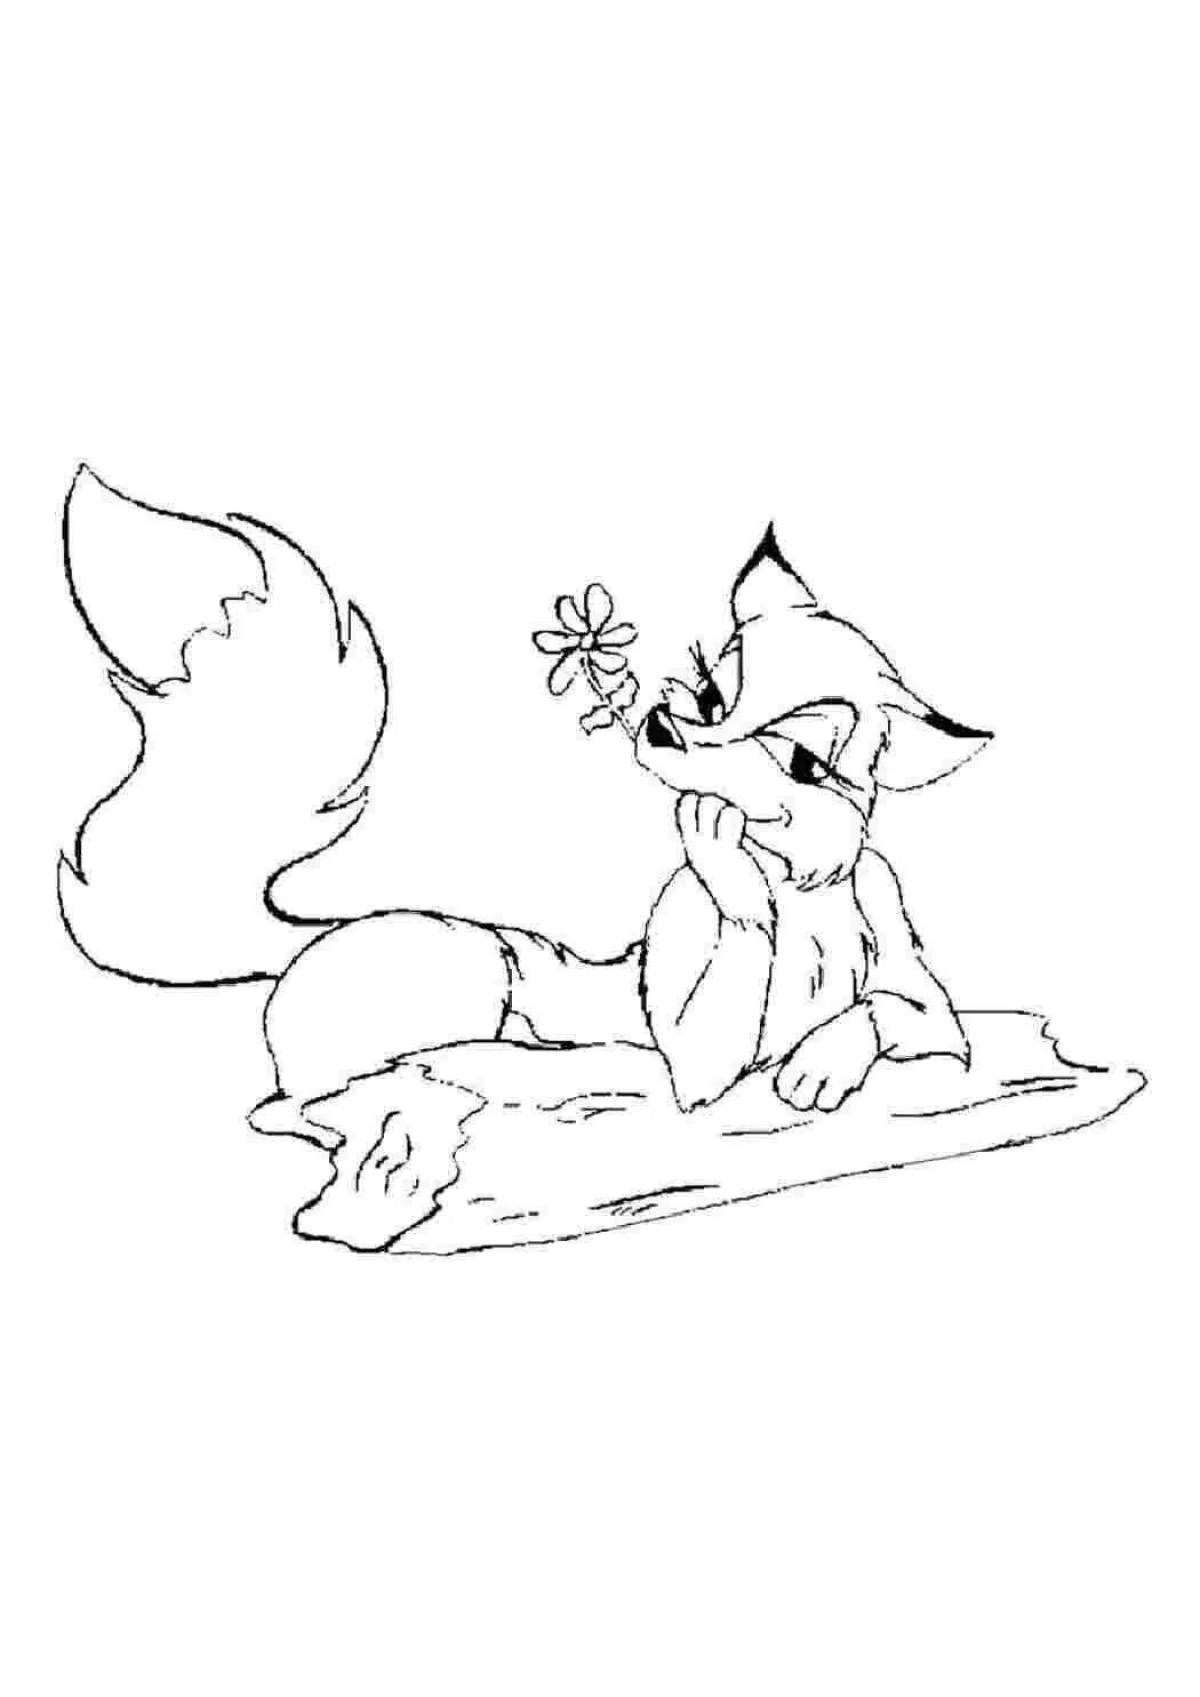 Coloring page graceful sitting fox